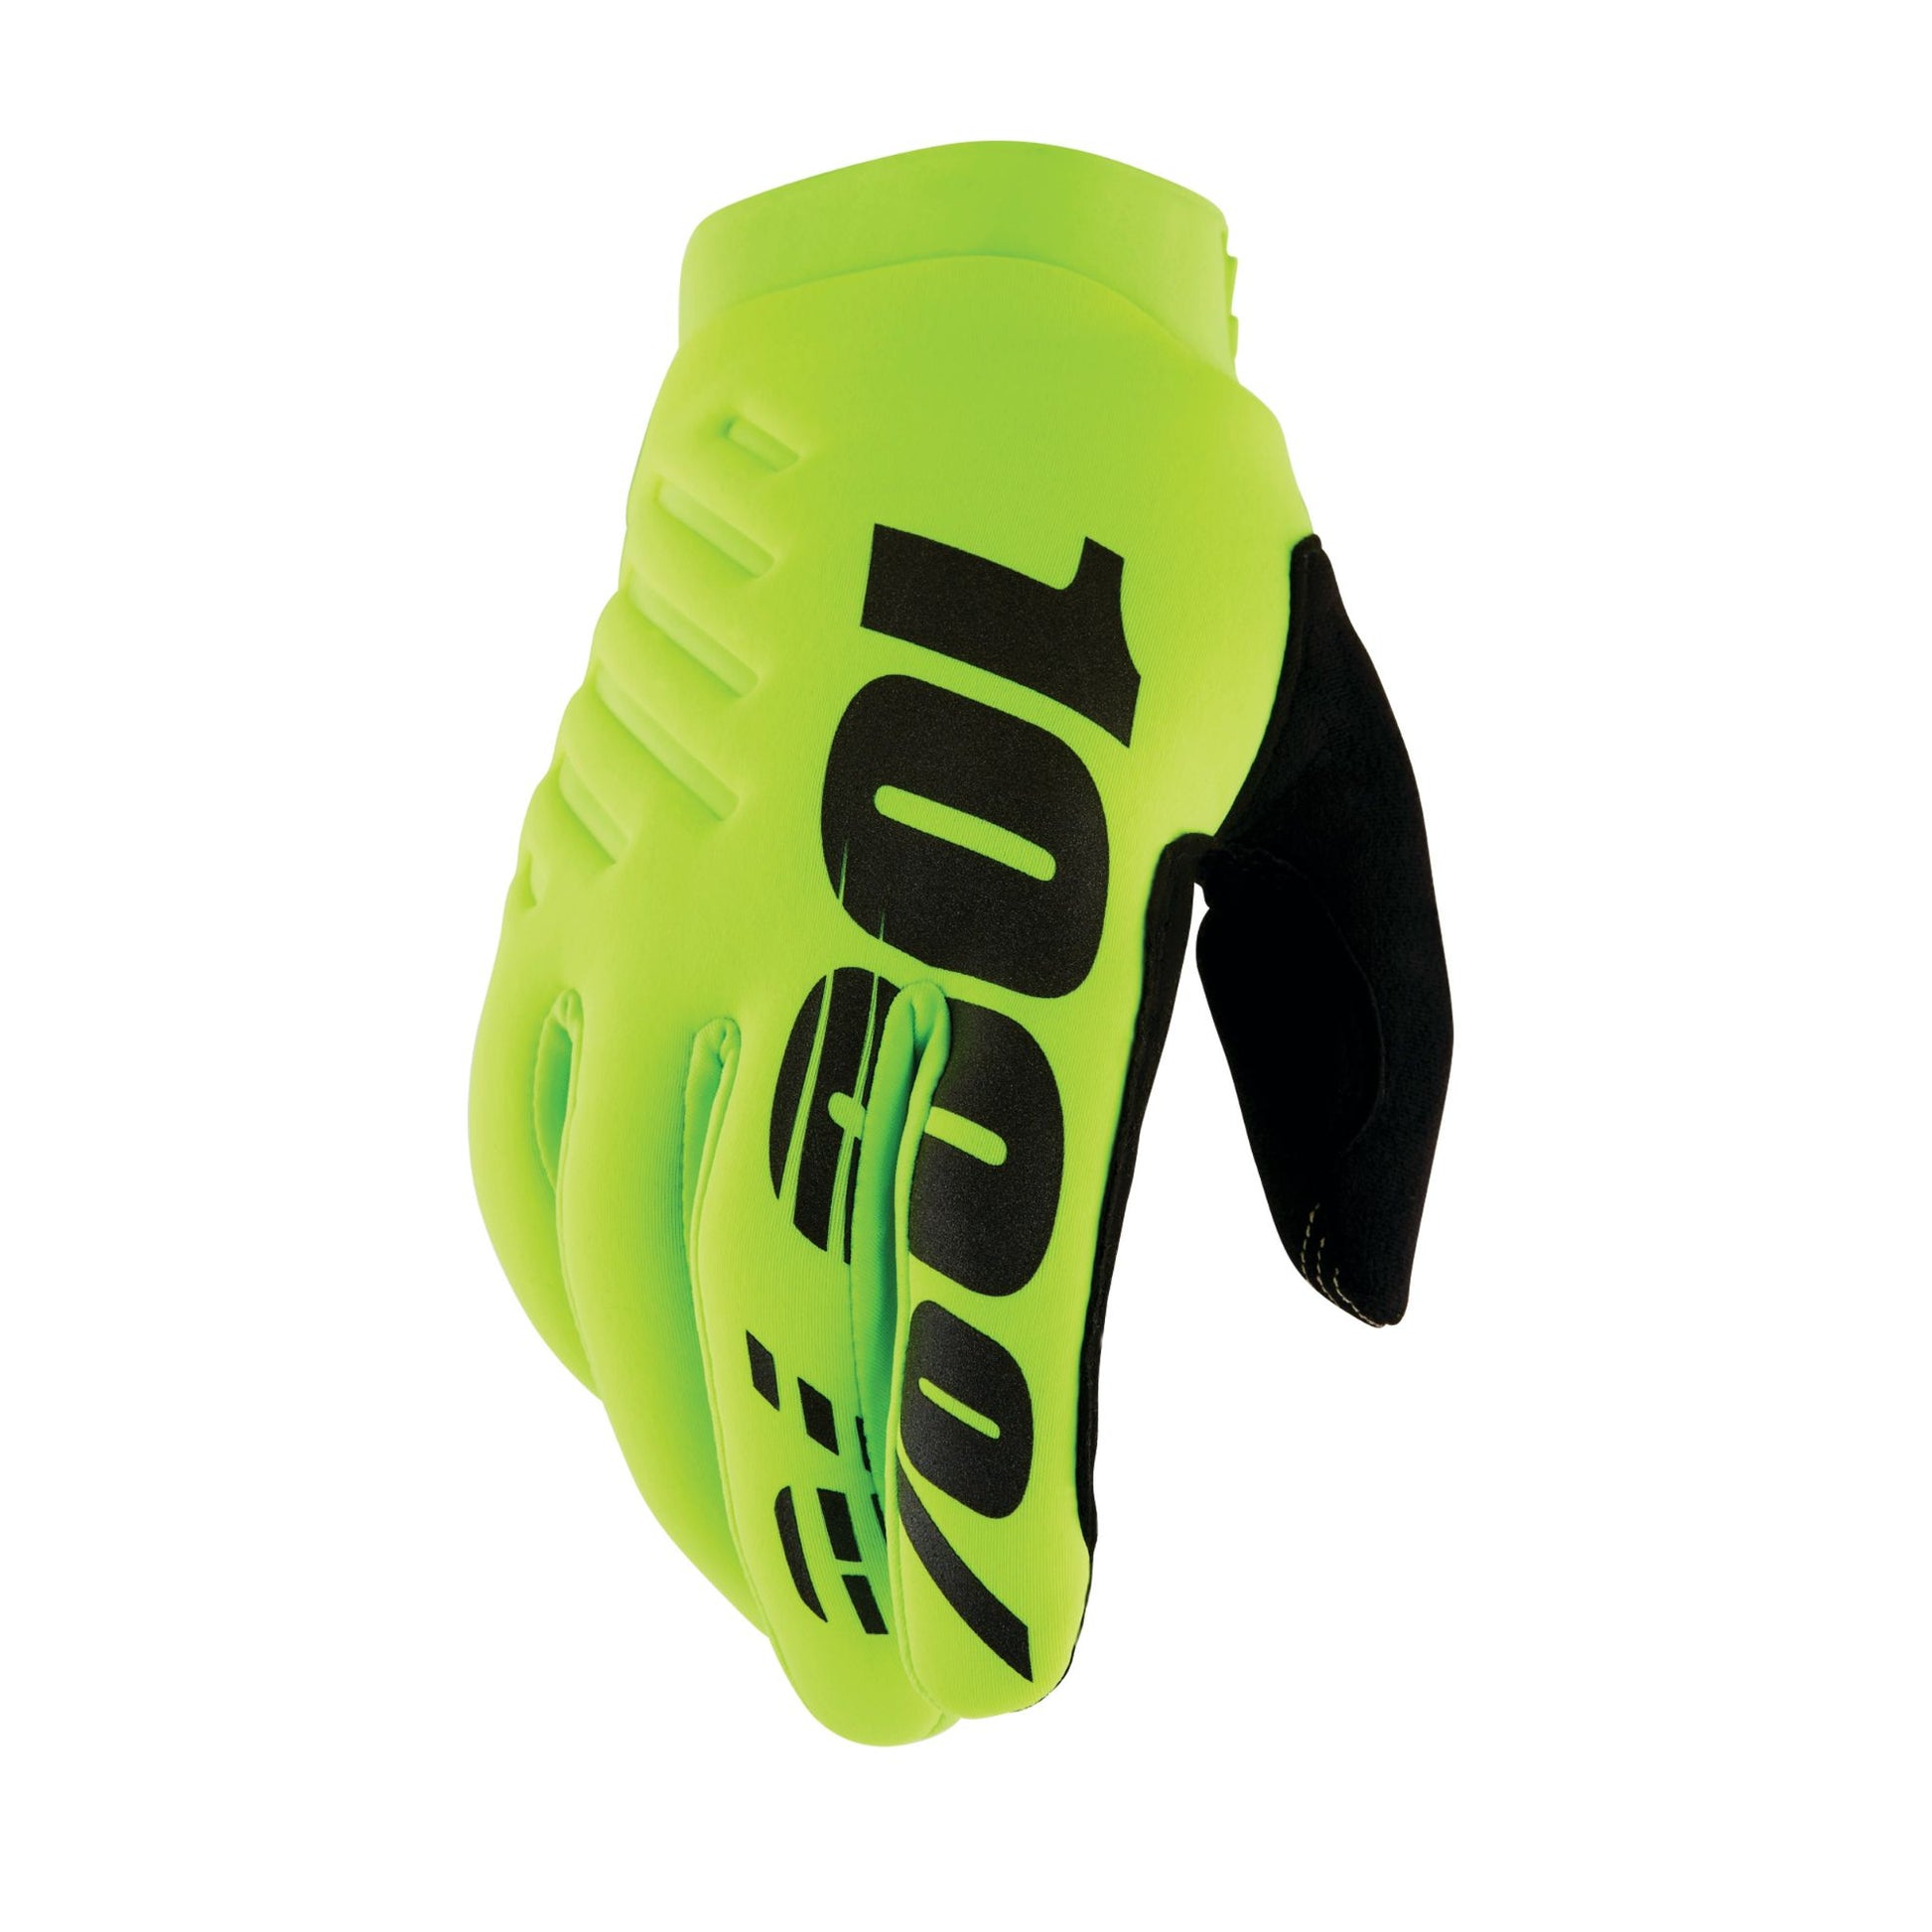 Kid's Full Finger Cycling Gloves 100% Brisker Youth AW22 Cold Weather Fluro Yellow/Black X Large